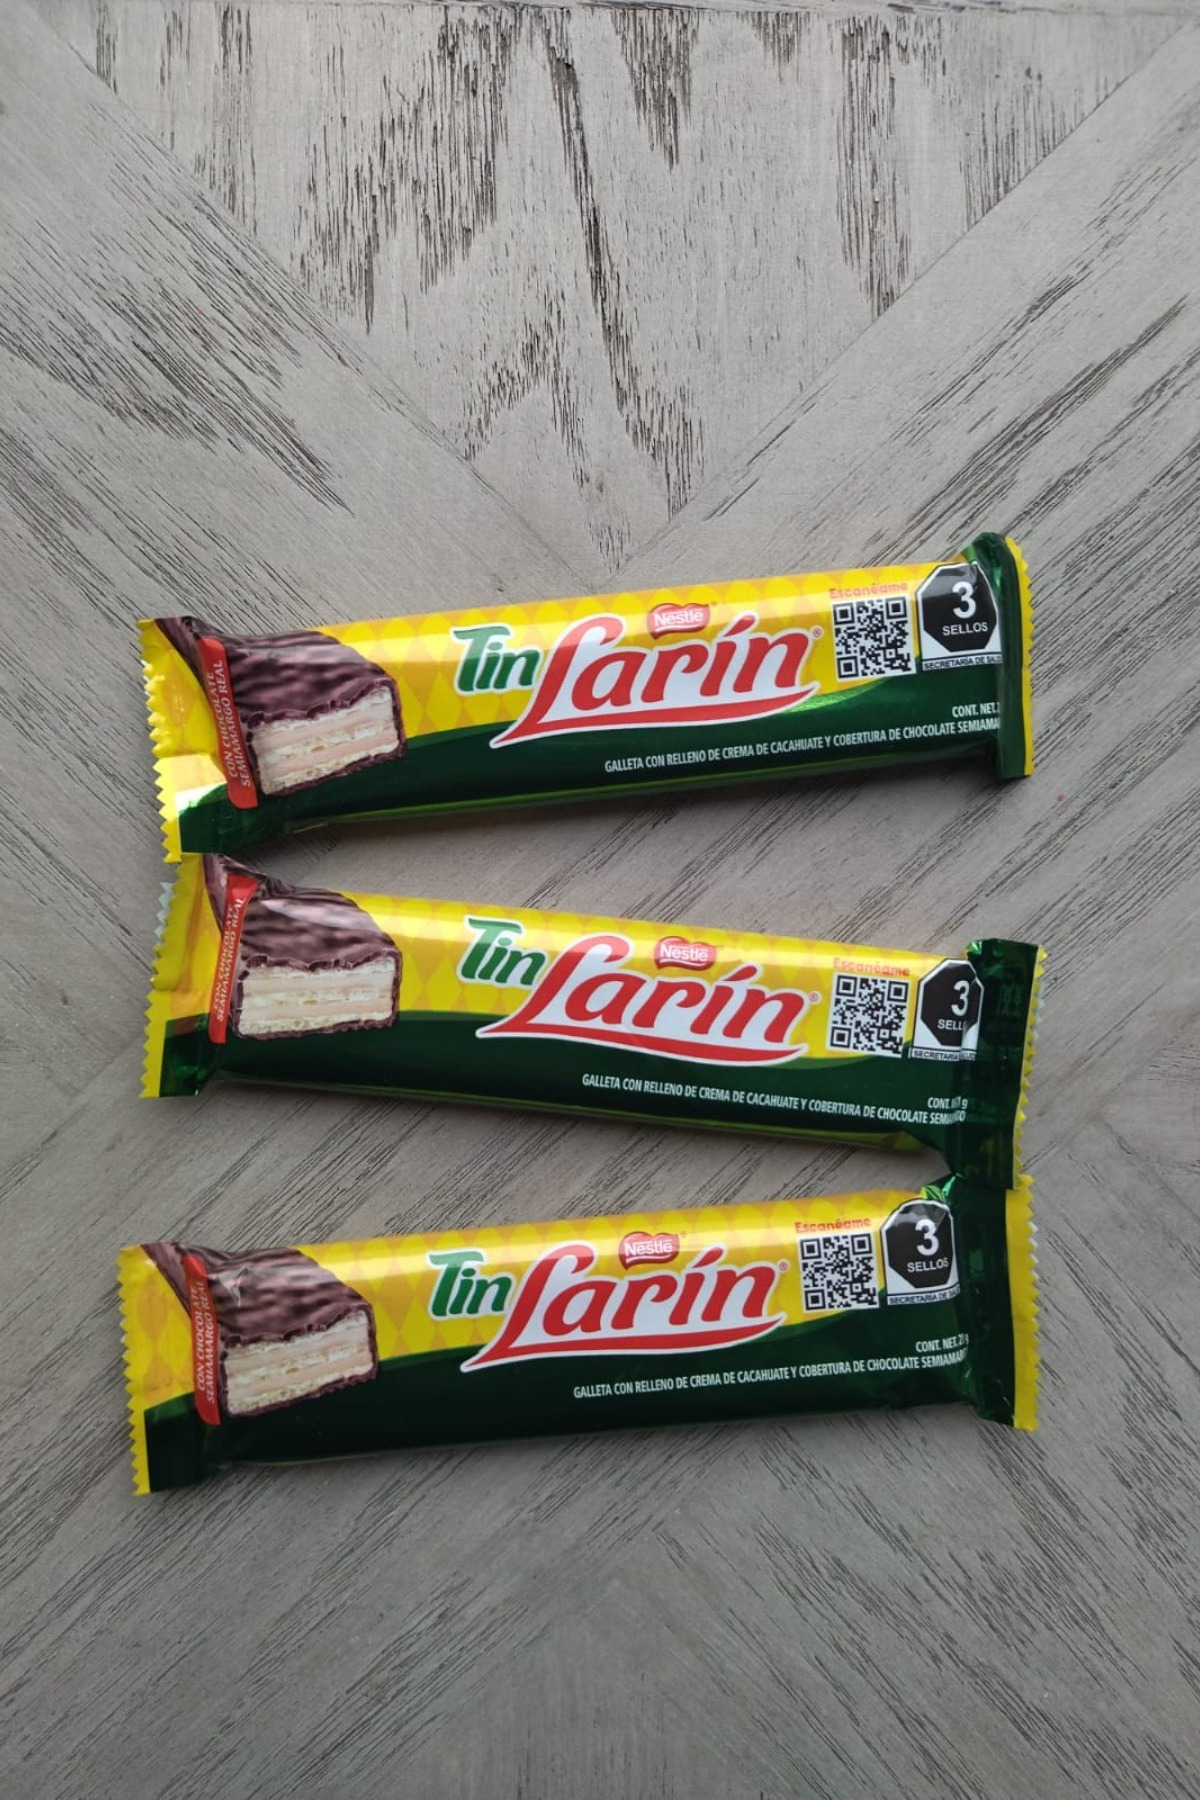 Tin Larin chocolate bars: The Best Mexican Candy